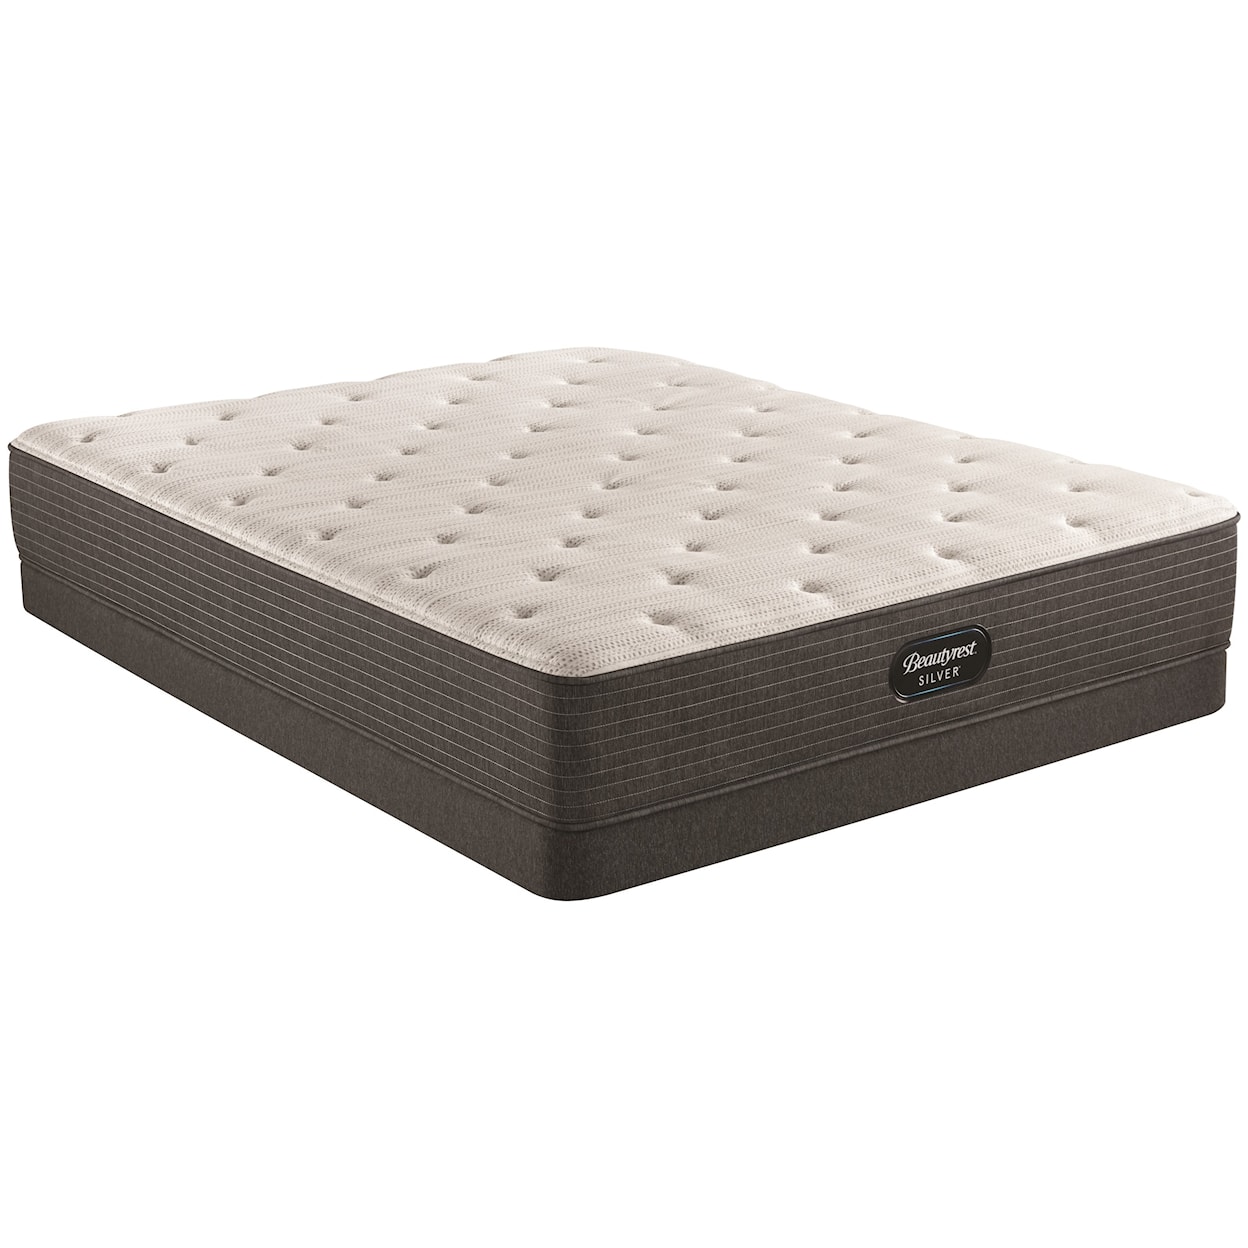 Beautyrest BRS900 Plush Twin 12" Pocketed Coil Low Pro Set